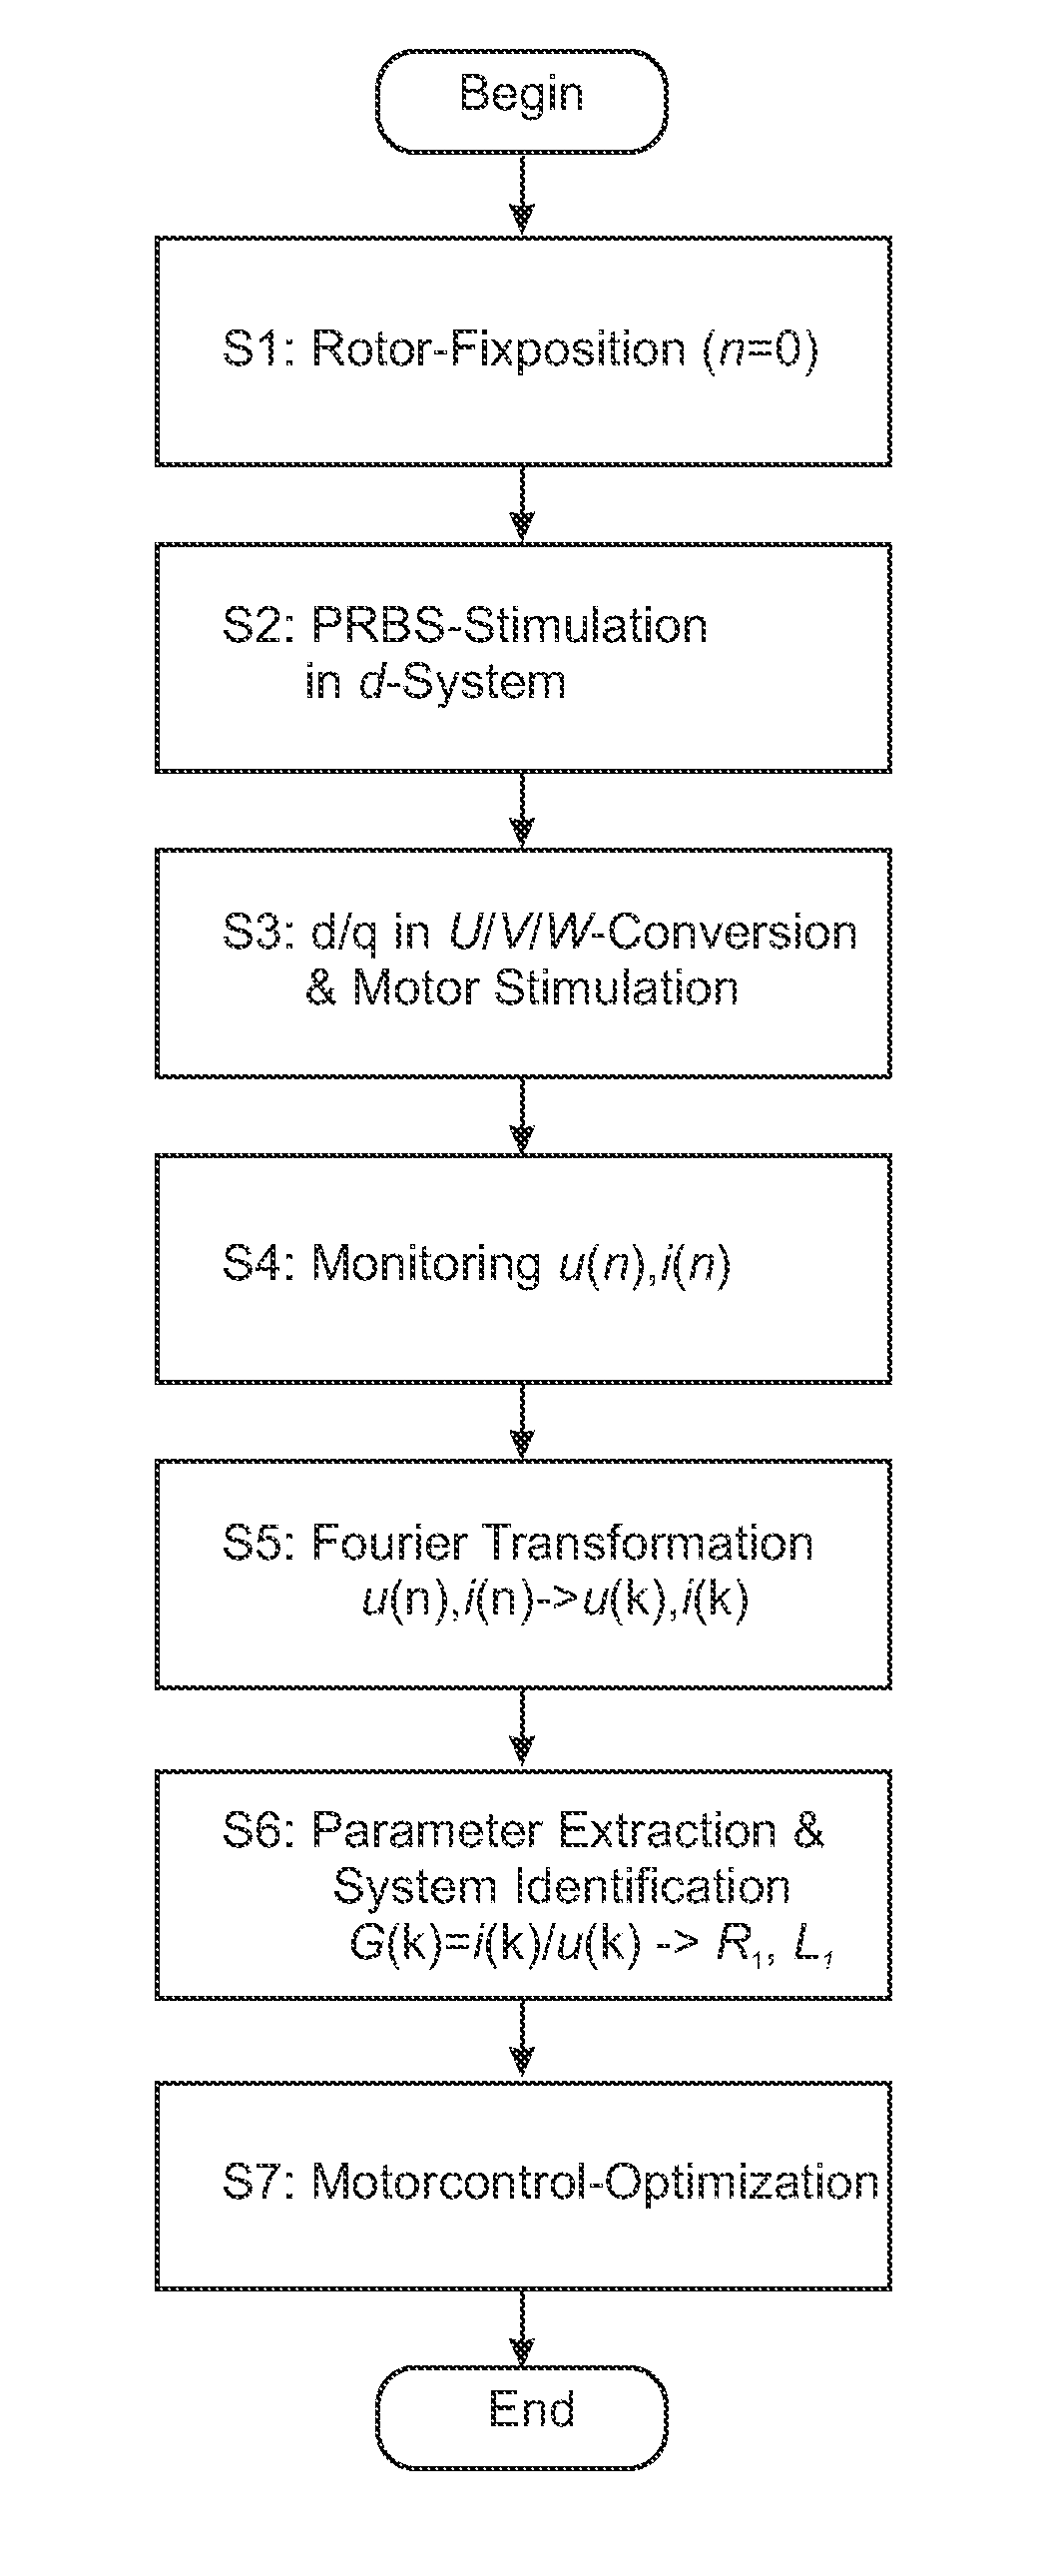 Apparatus And Method For Rotating-Sensorless Identification Of Equivalent Circuit Parameters Of An AC Synchronous Motor